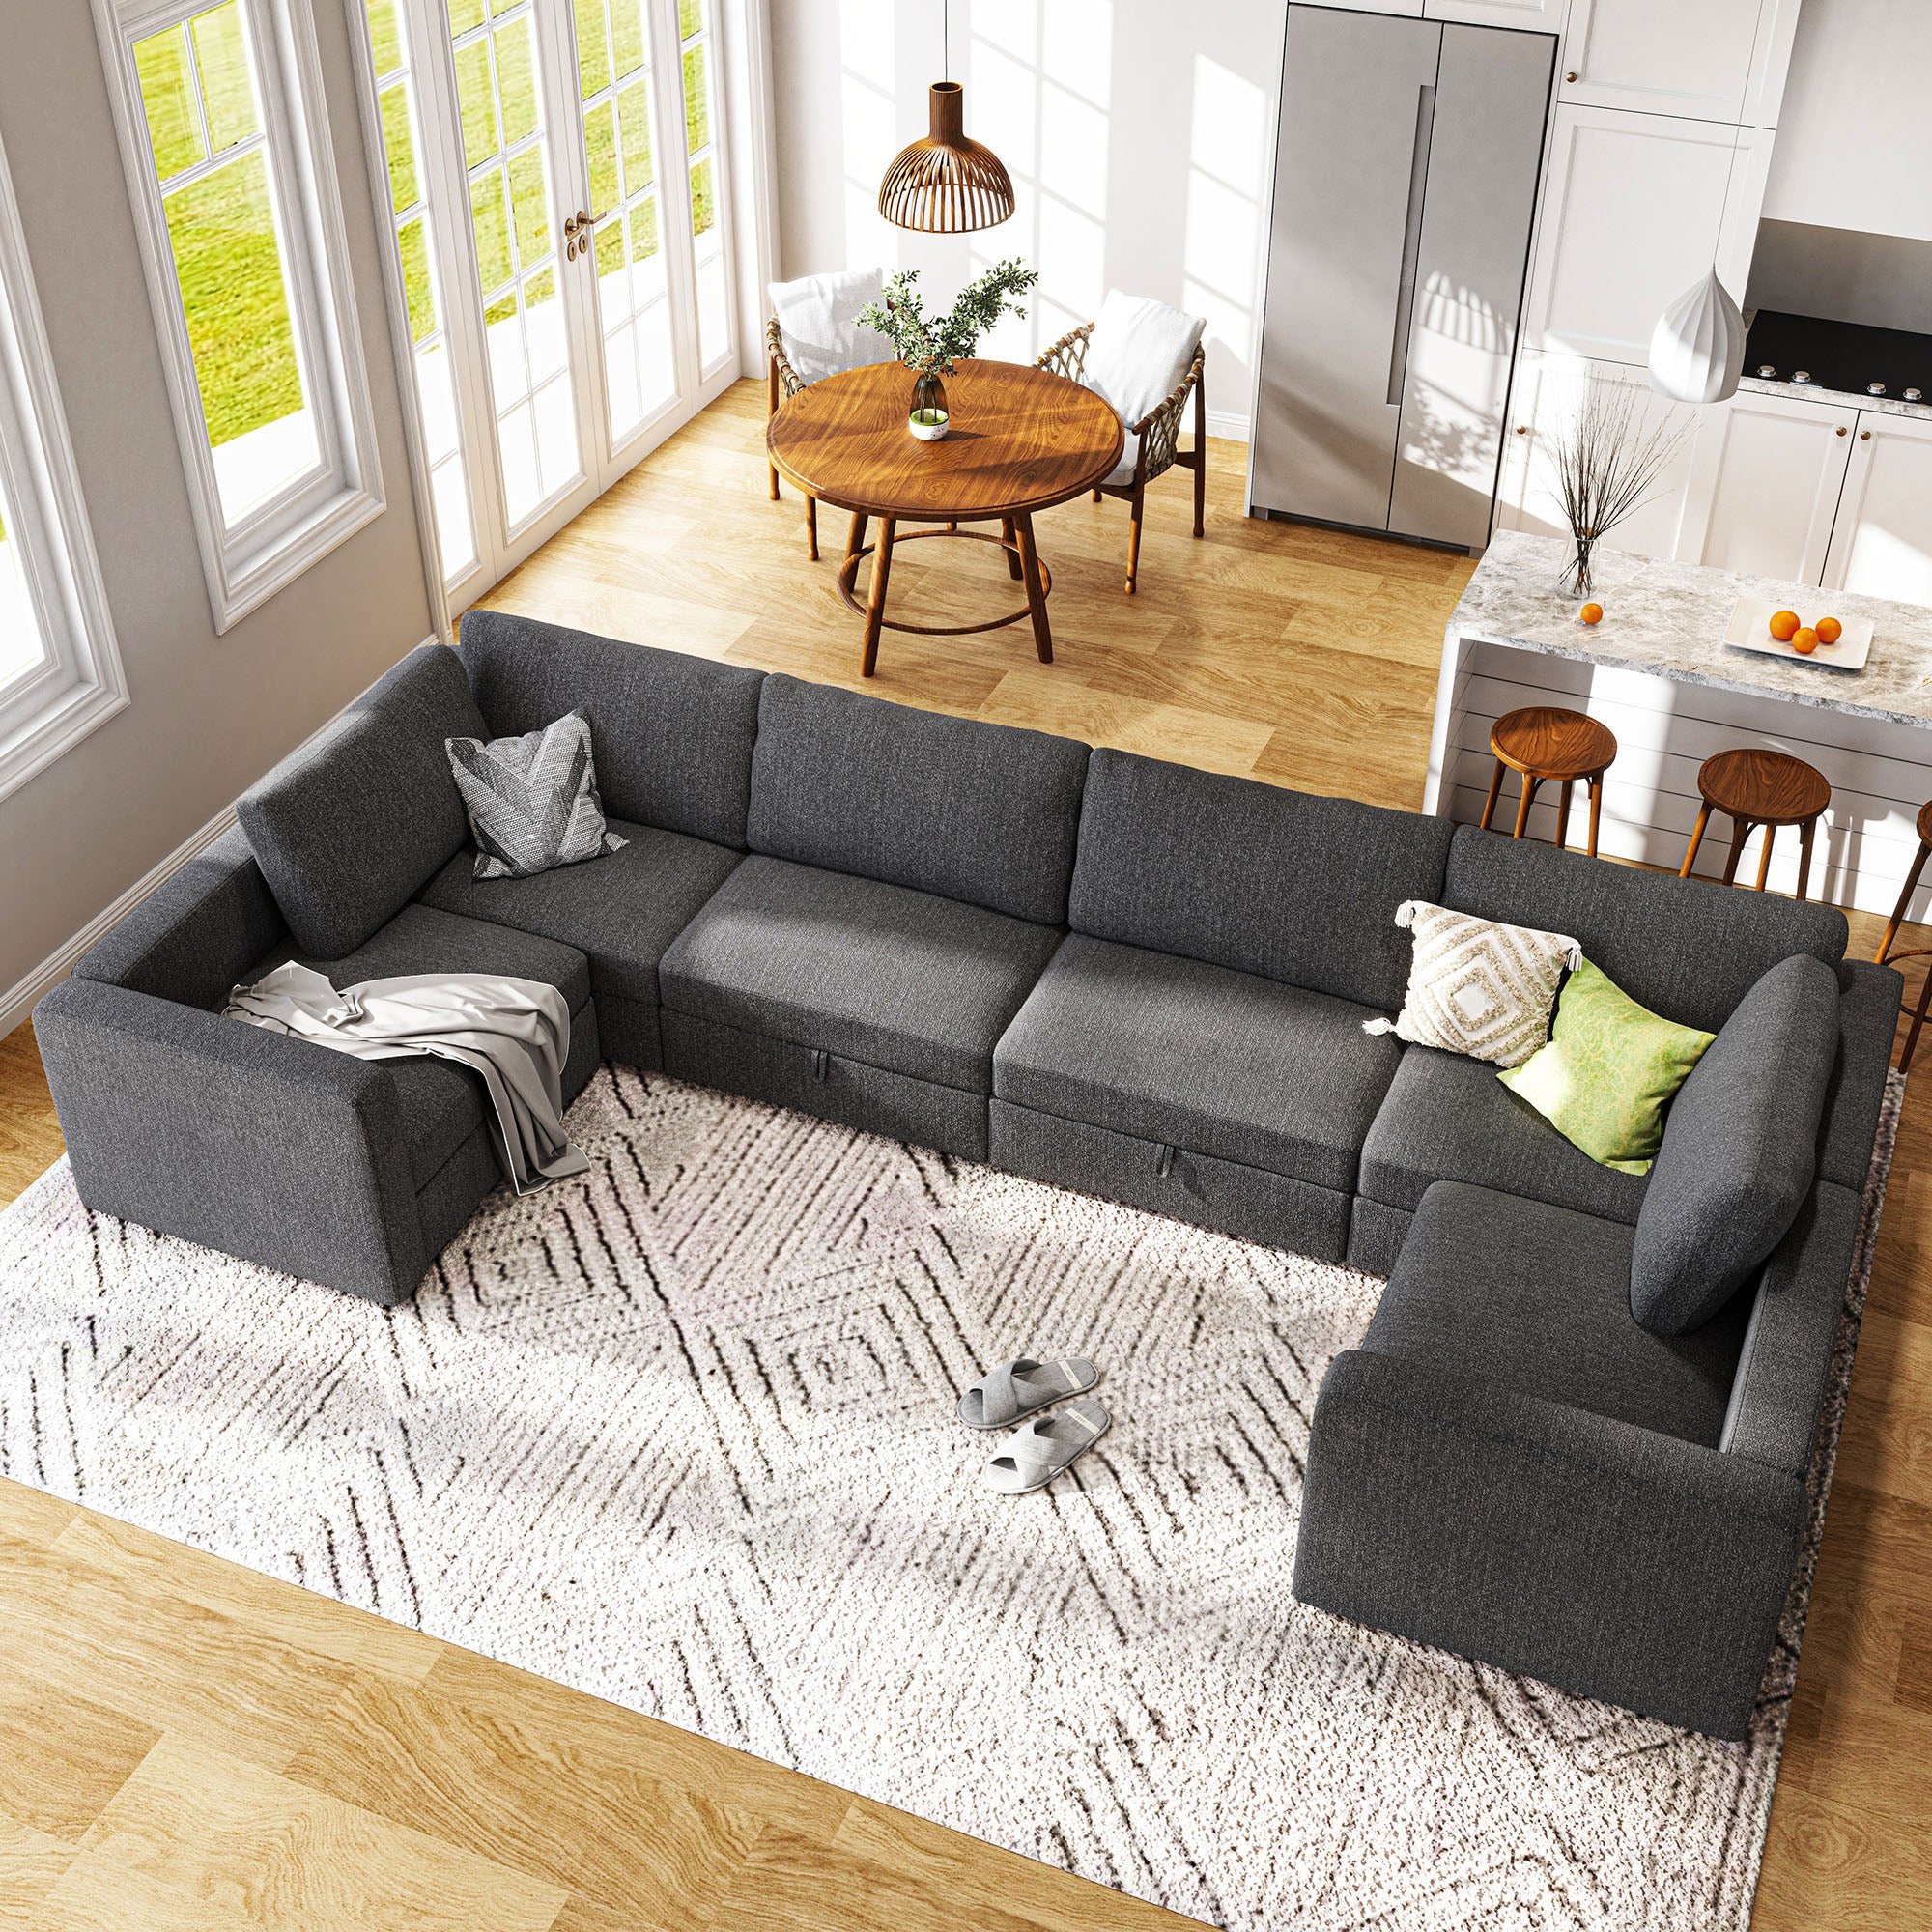 HONBAY Wider Modular Sofa 6-Seat+10-Side with Storage Seater